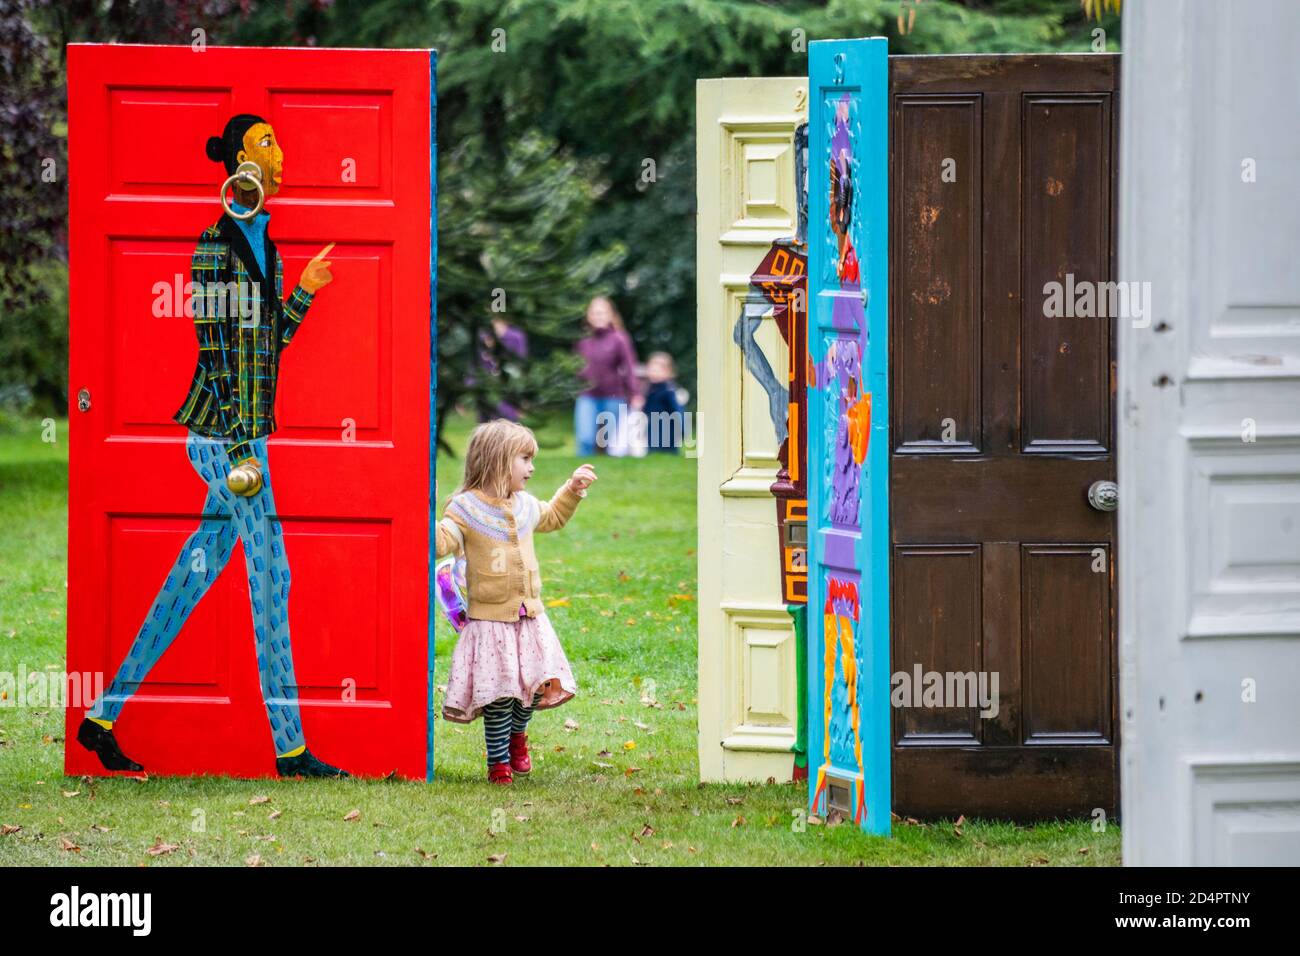 London, UK. 10th Oct, 2020. Lubaina Himid, Five Conversations, 2019 - Frieze Sculpture, the largest outdoor exhibition in London. Work by 12 leading international artists in Regent's Park from 5th October - 18h October in a free showcase. Credit: Guy Bell/Alamy Live News Stock Photo